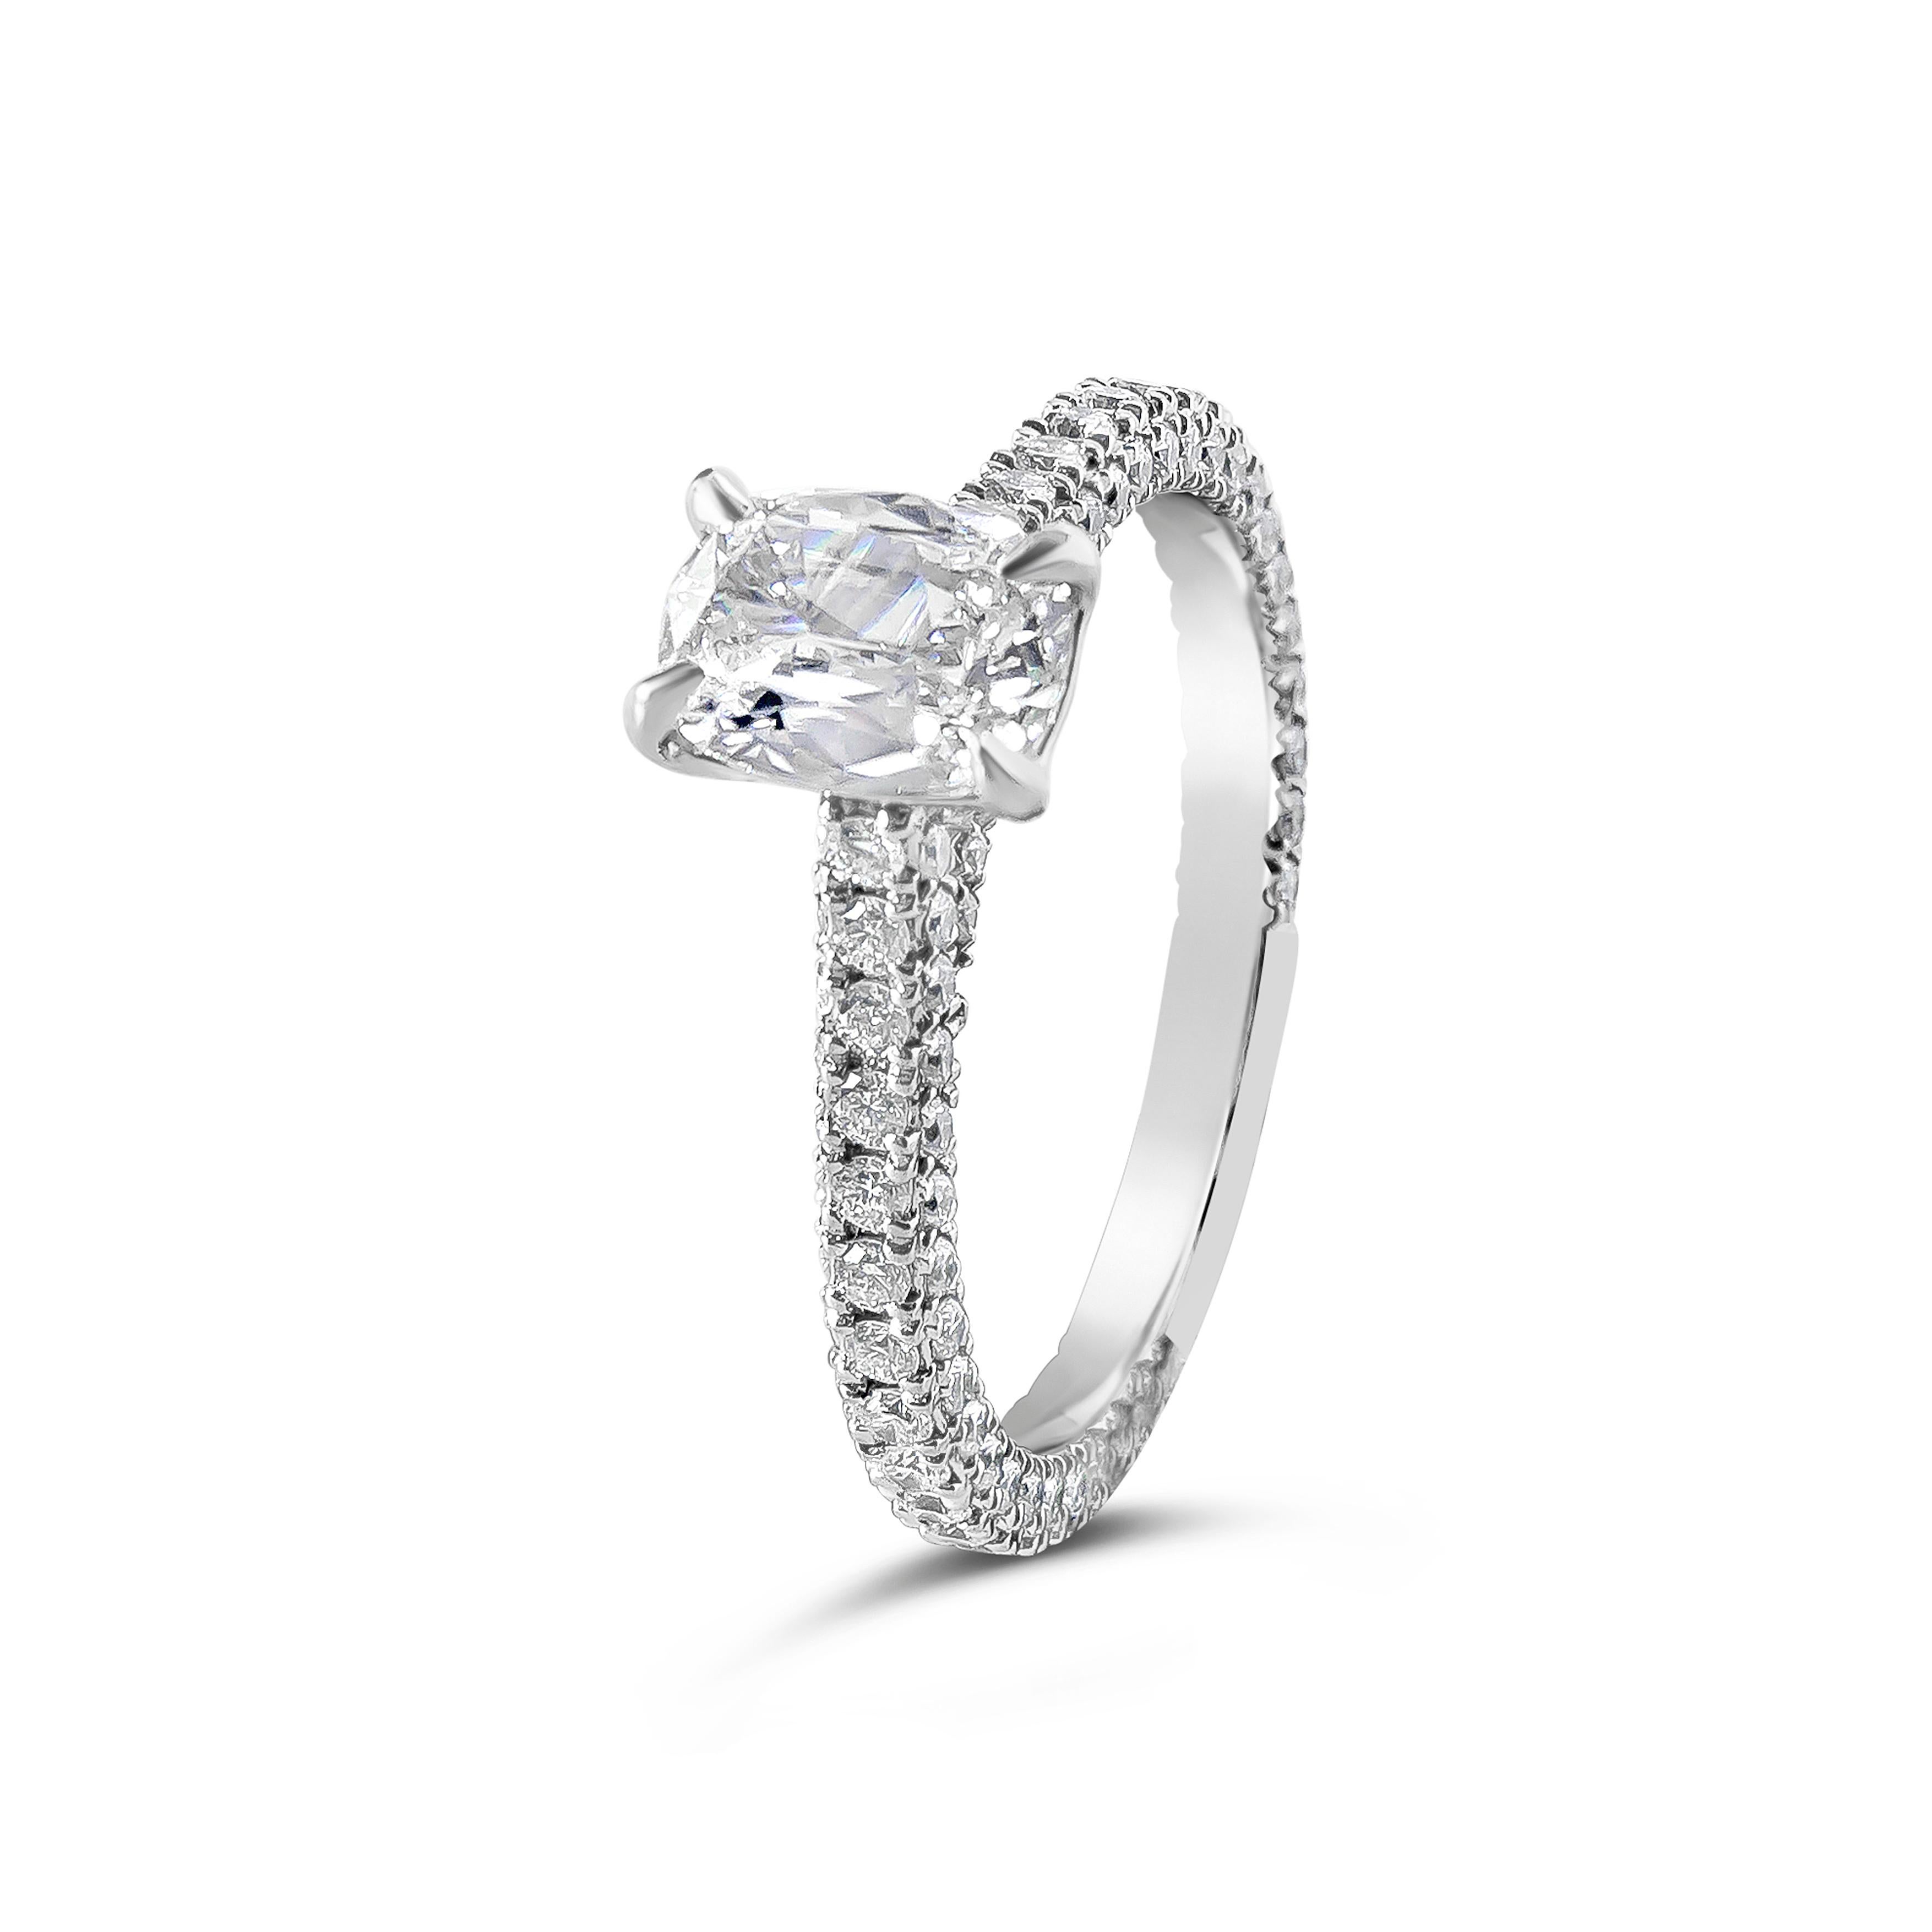 An elegant ring of elongated cushion cut diamond weighing 0.85 carat certified by GIA as I color and VS2 clarity. Set on an intricately designed platinum shank accented with micropavé round brilliant cut diamonds weighing 0.90 carat total. Size 6.75